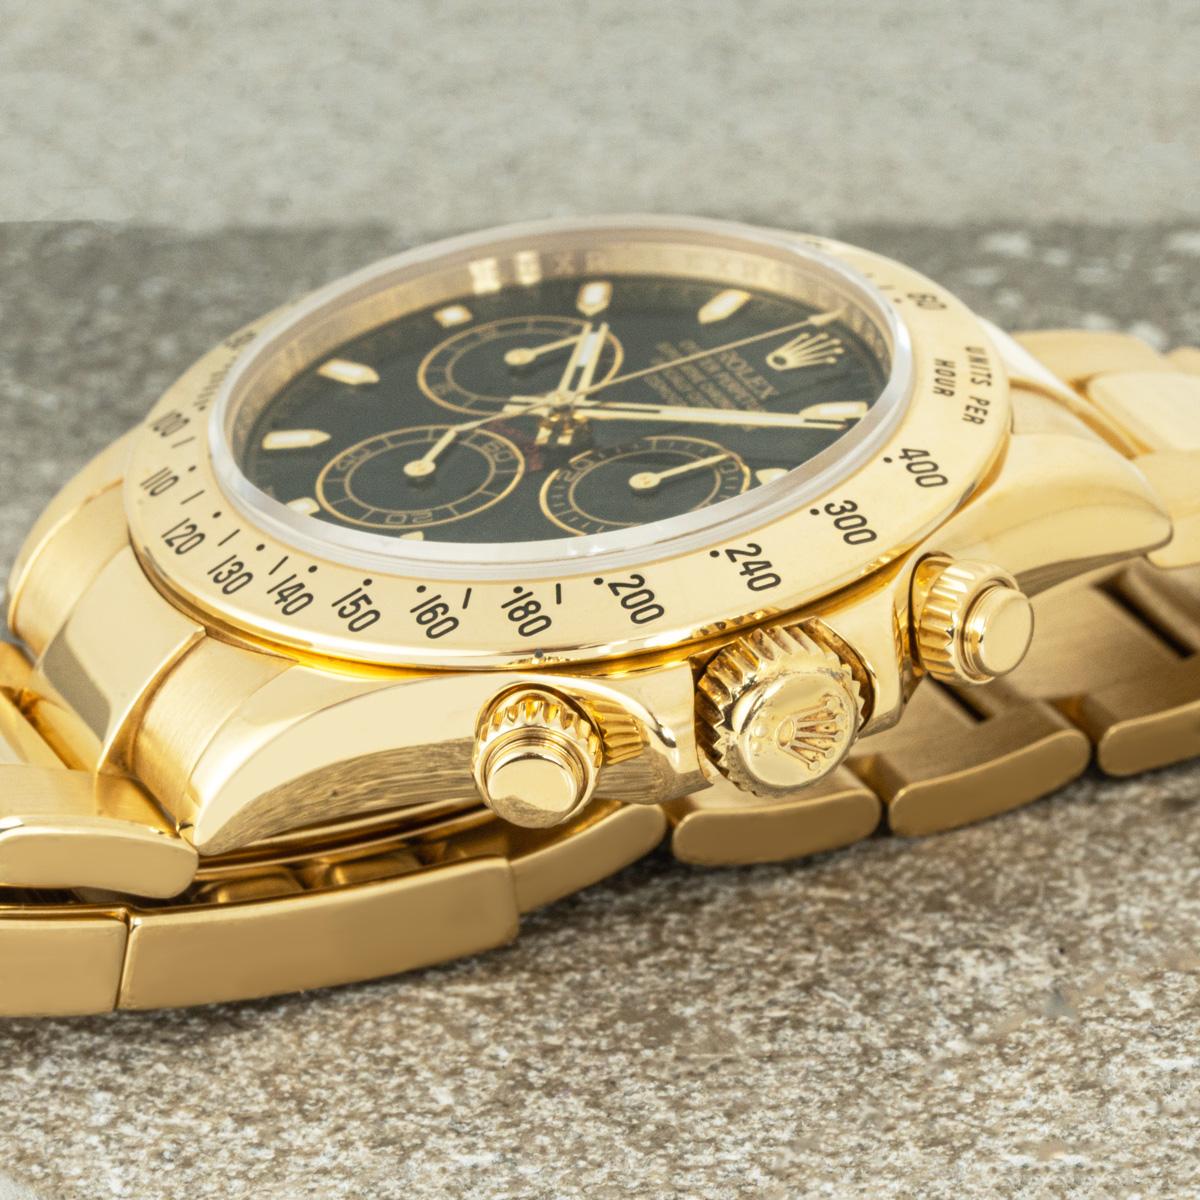 A Daytona in yellow gold by Rolex. Features a black dial with applied hour marker, a tachymetric scale, three counters and pushers; the Daytona was designed to be the ultimate timing tool for endurance racing drivers.

The Oyster bracelet is